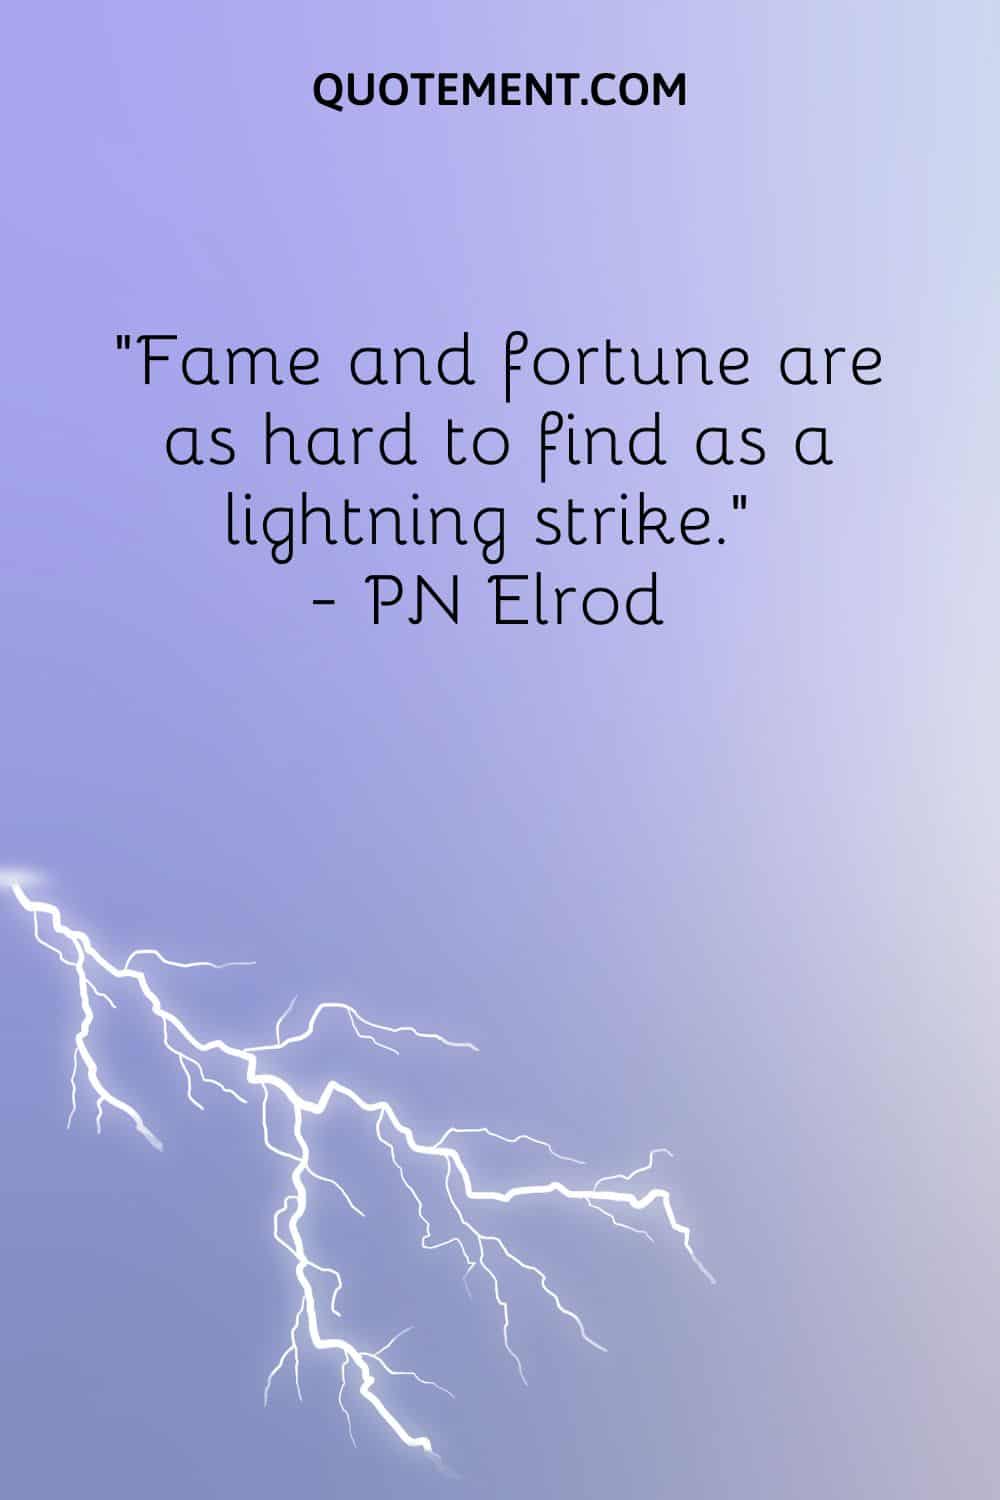 Fame and fortune are as hard to find as a lightning strike